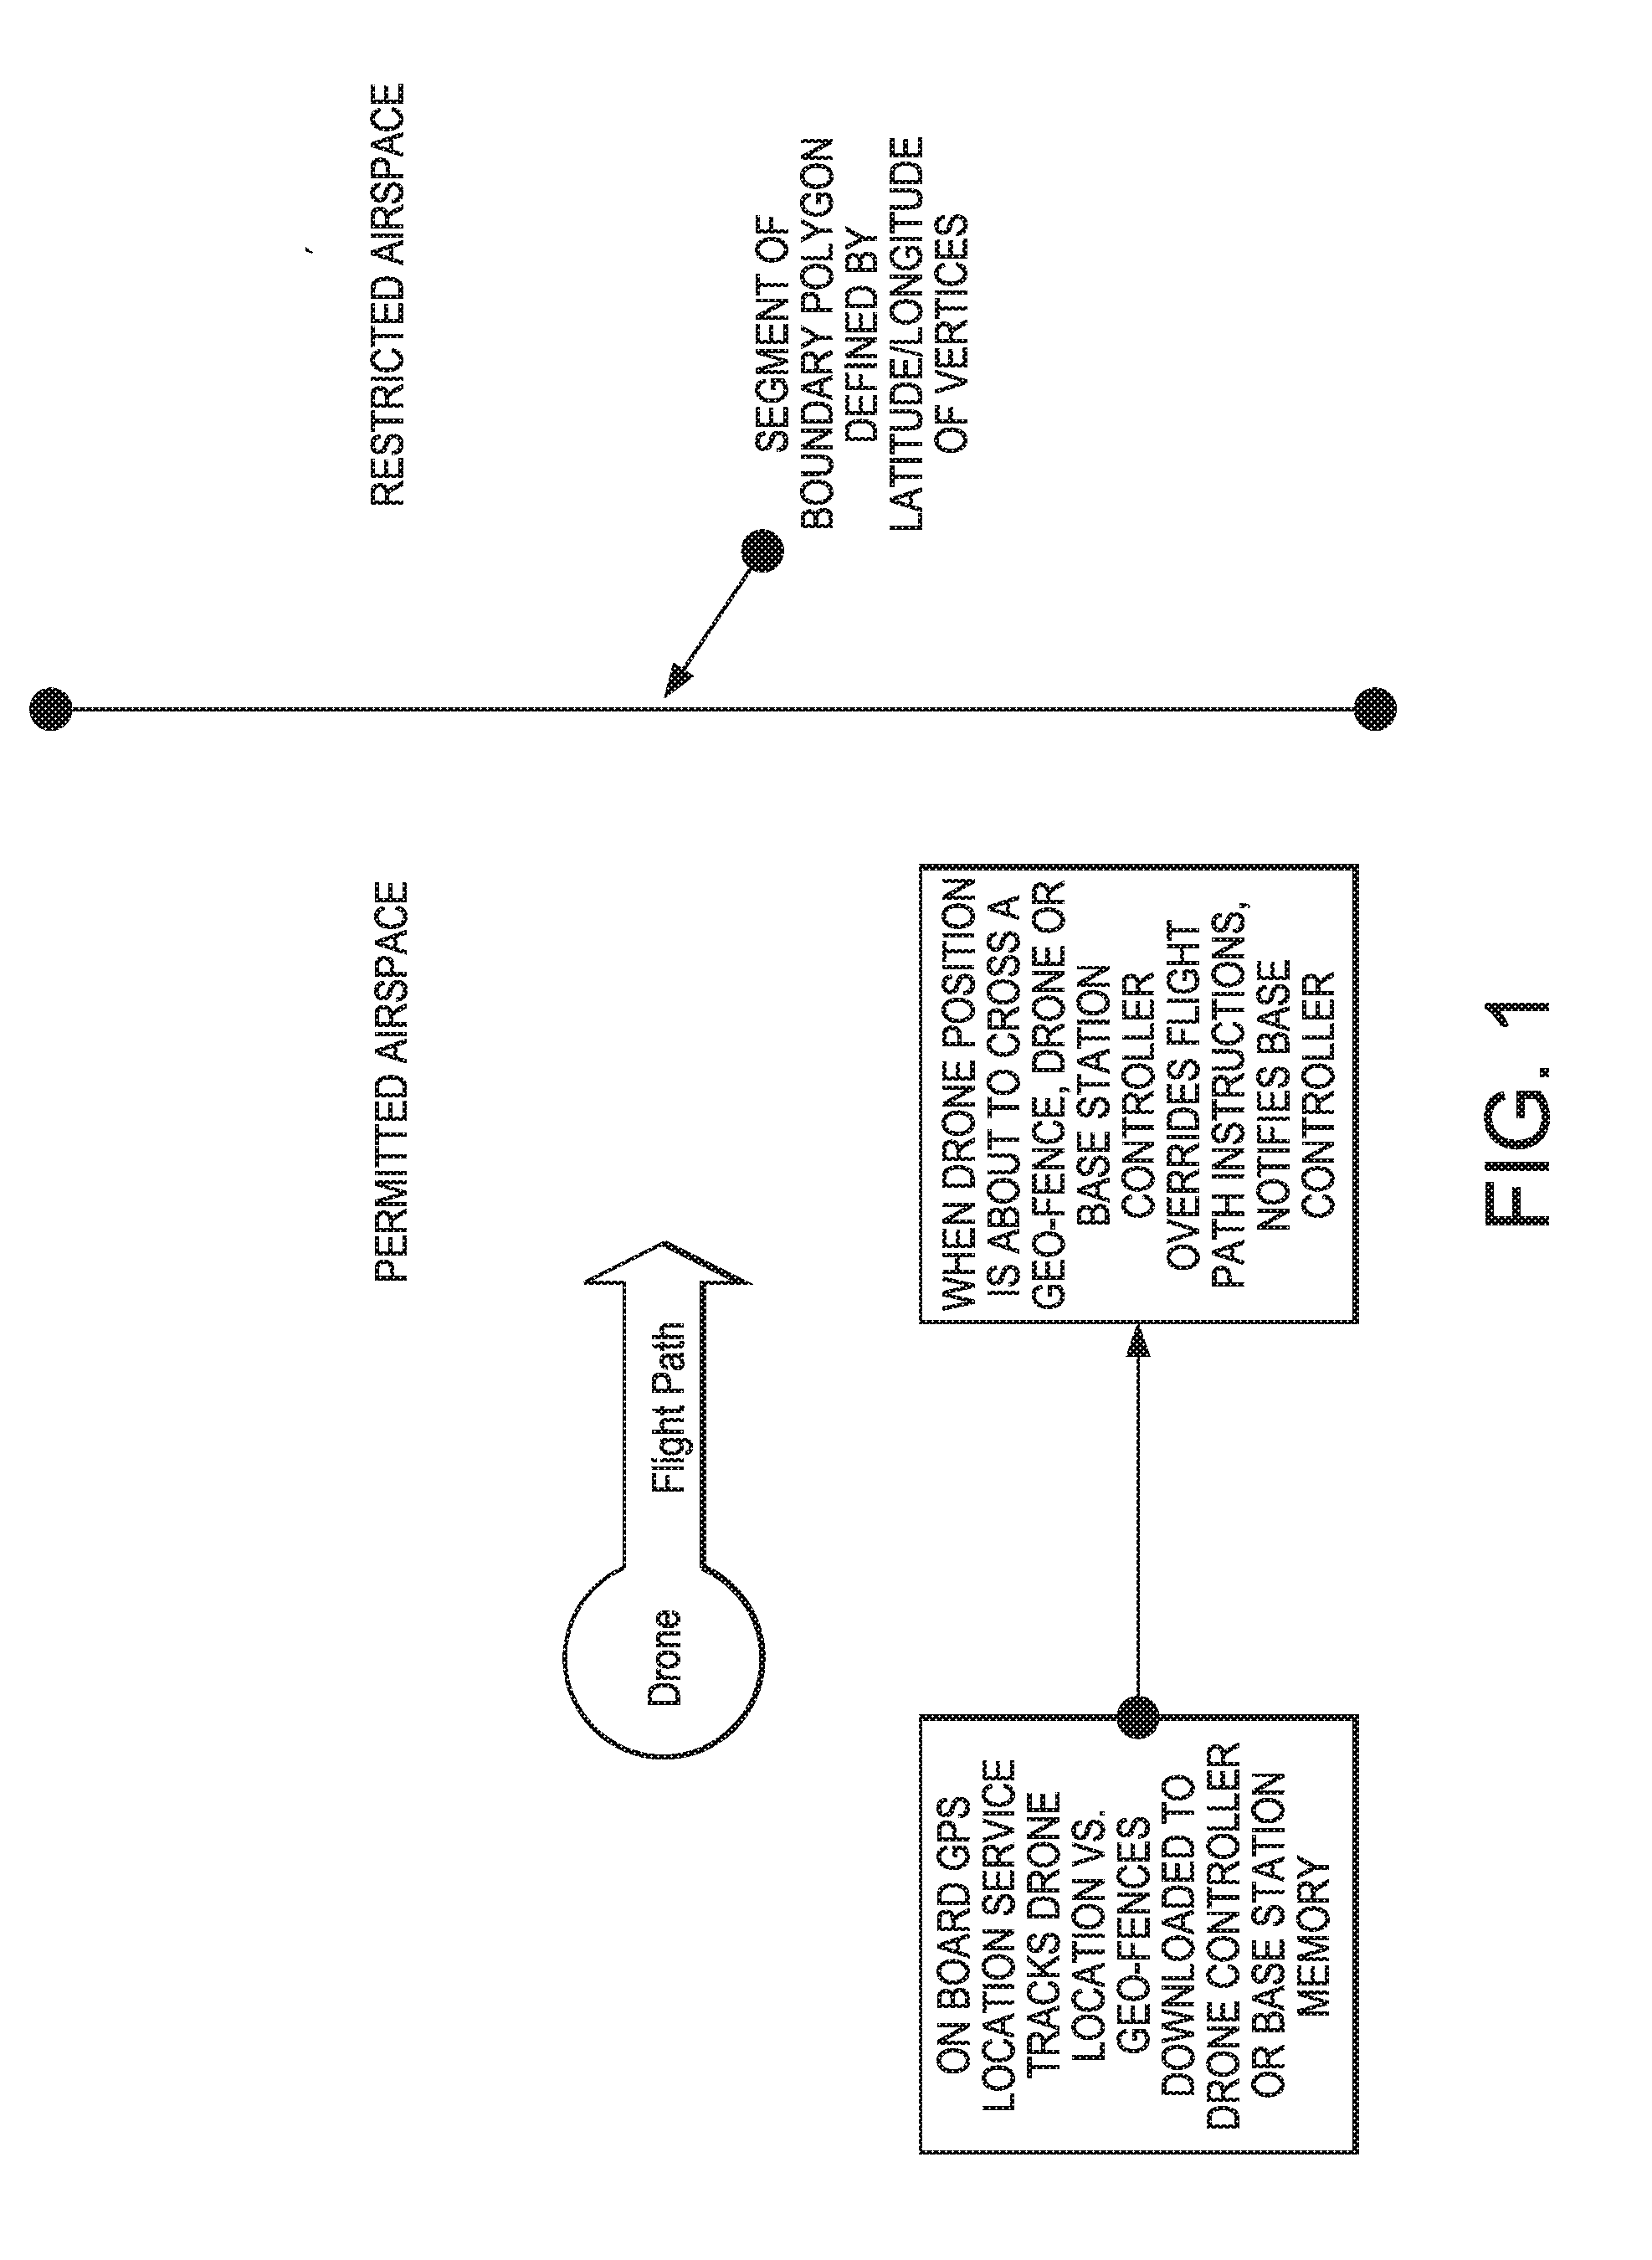 Method for keeping drones within a designated boundary